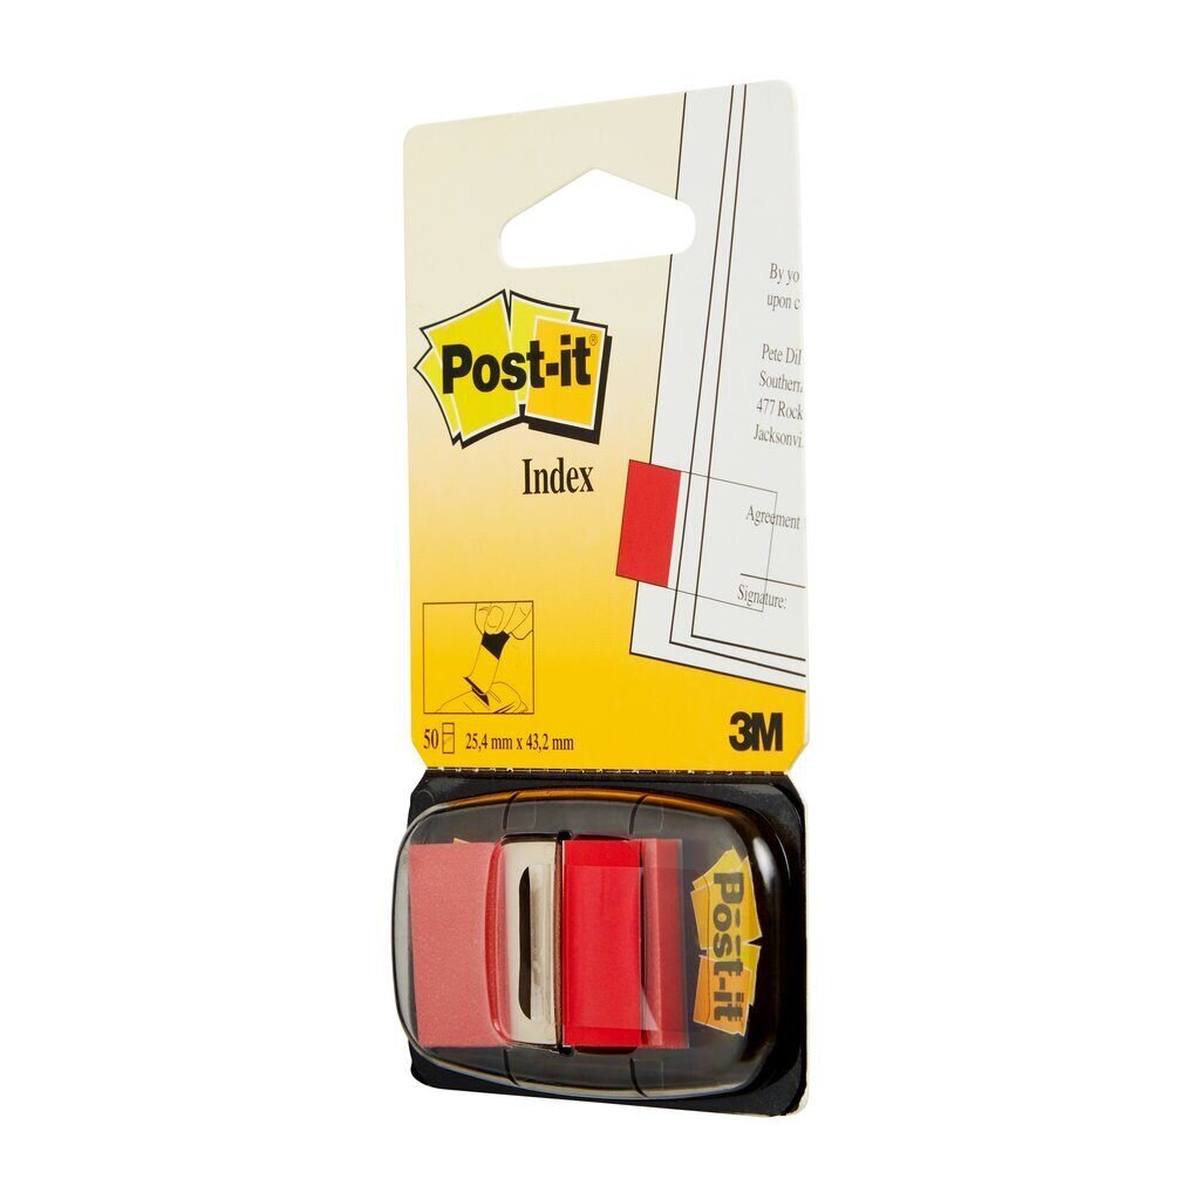 3M Post-it Indice I680-1, 25,4 mm x 43,2 mm, rosso, 1 x 50 strisce adesive in dispenser